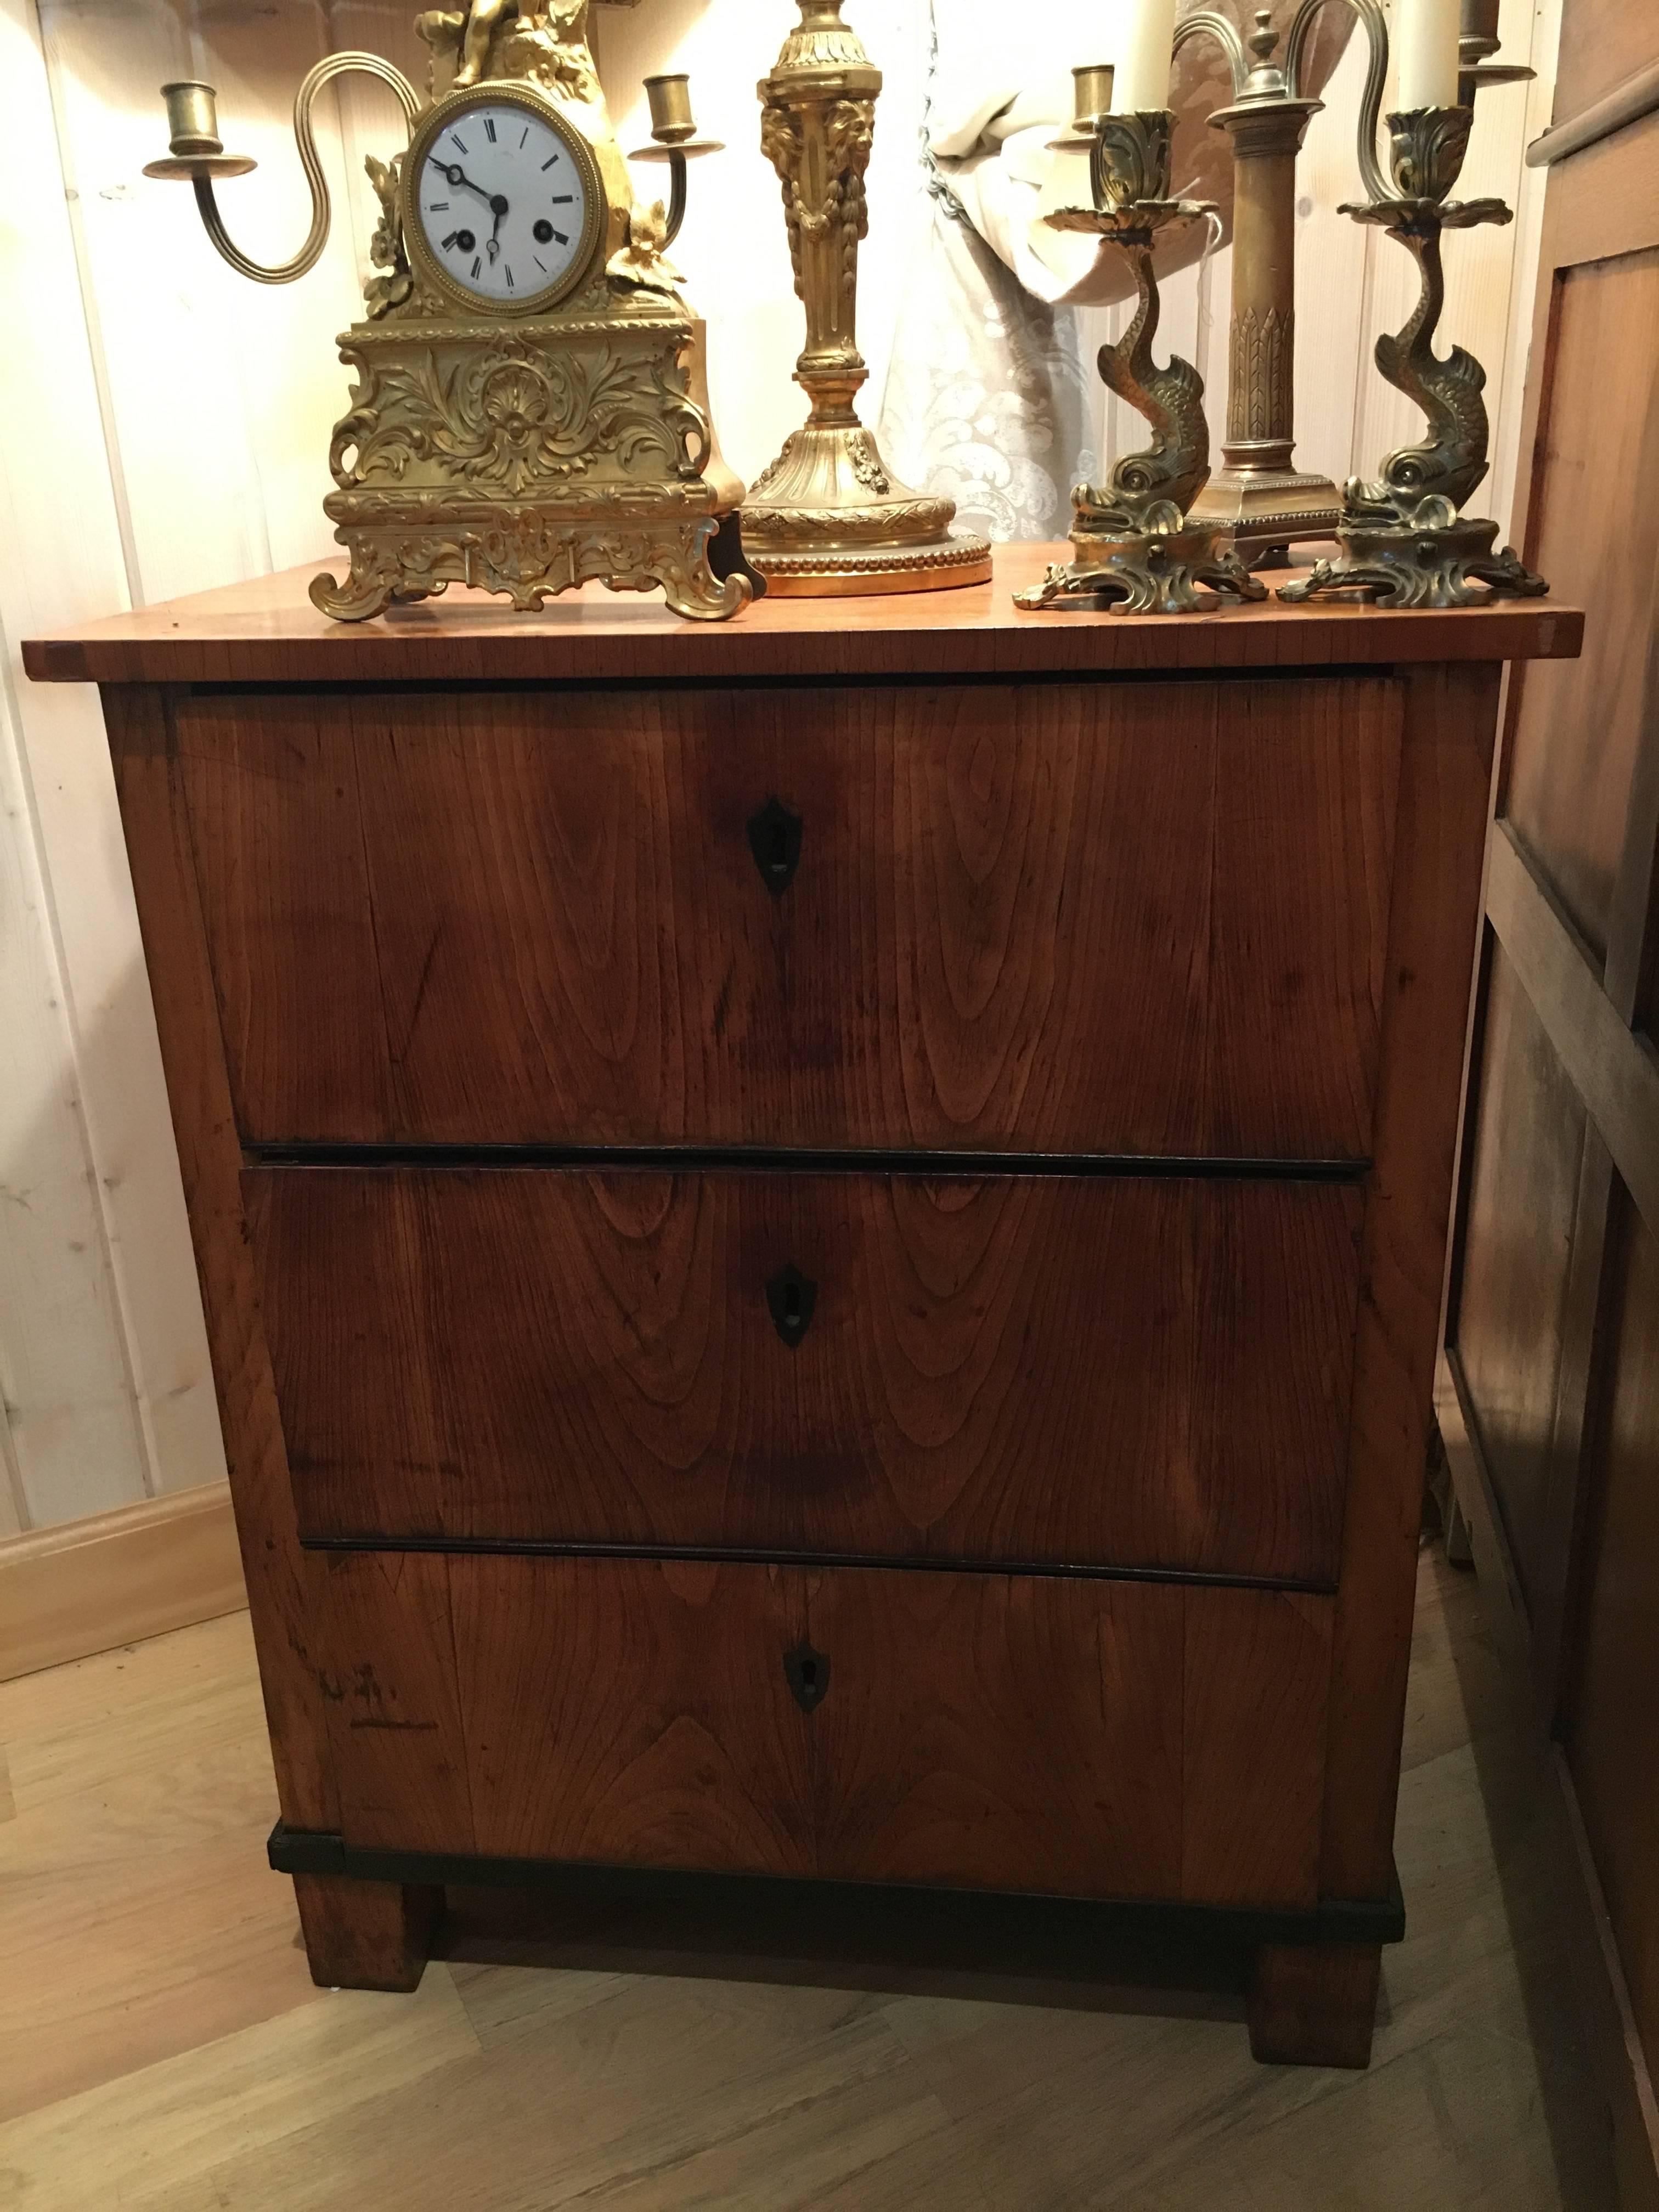 An Italian fruitwood neoclassical three-drawer chest. Top drawer drops down as a desk.   Measure: Height 30 1/2 x width 25 1/2 x depth 15 1/2 inches.